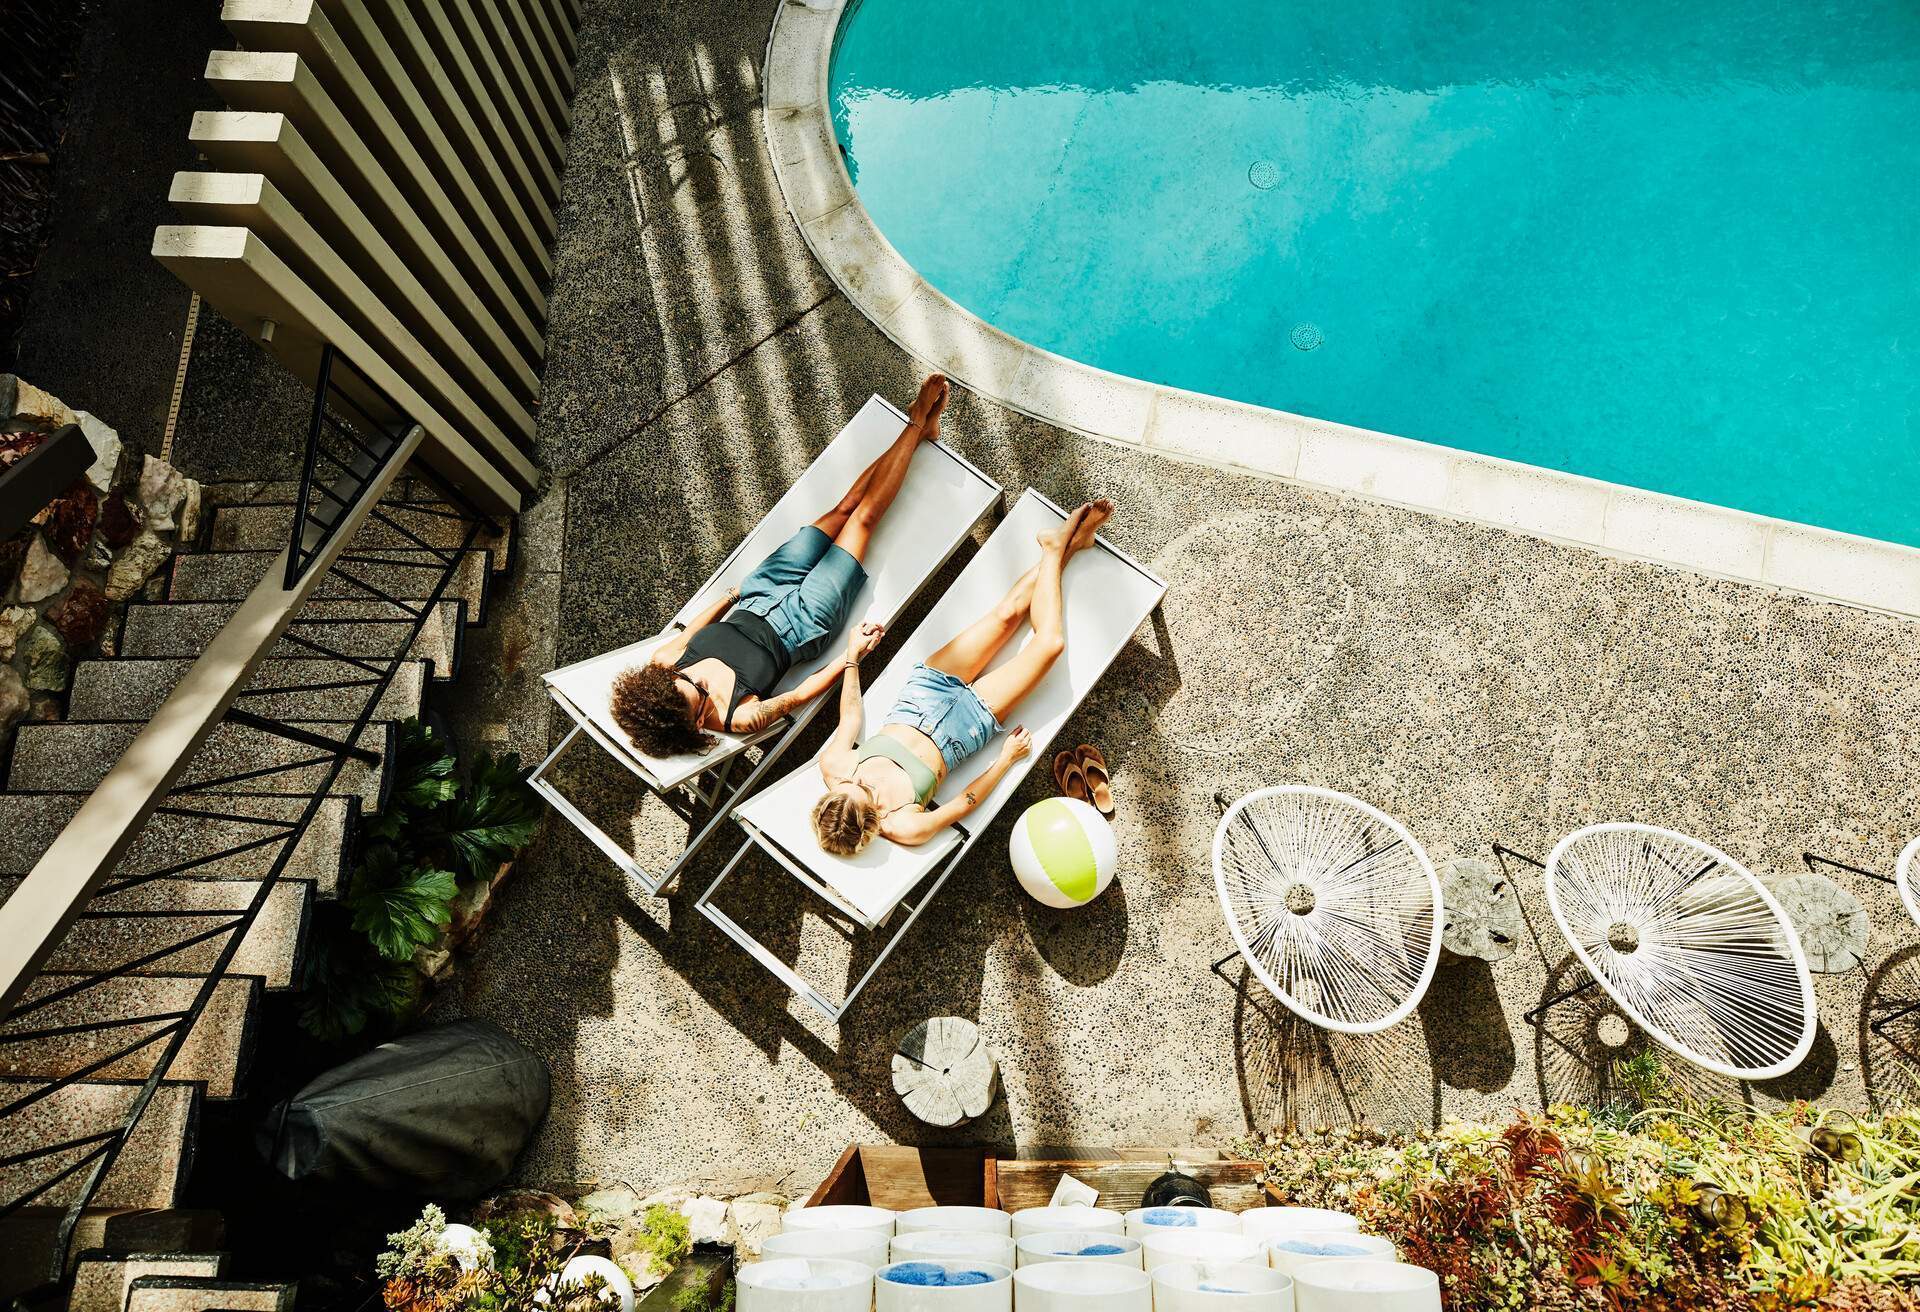 Two women holding hands as they sit on lounge chairs by the pool.